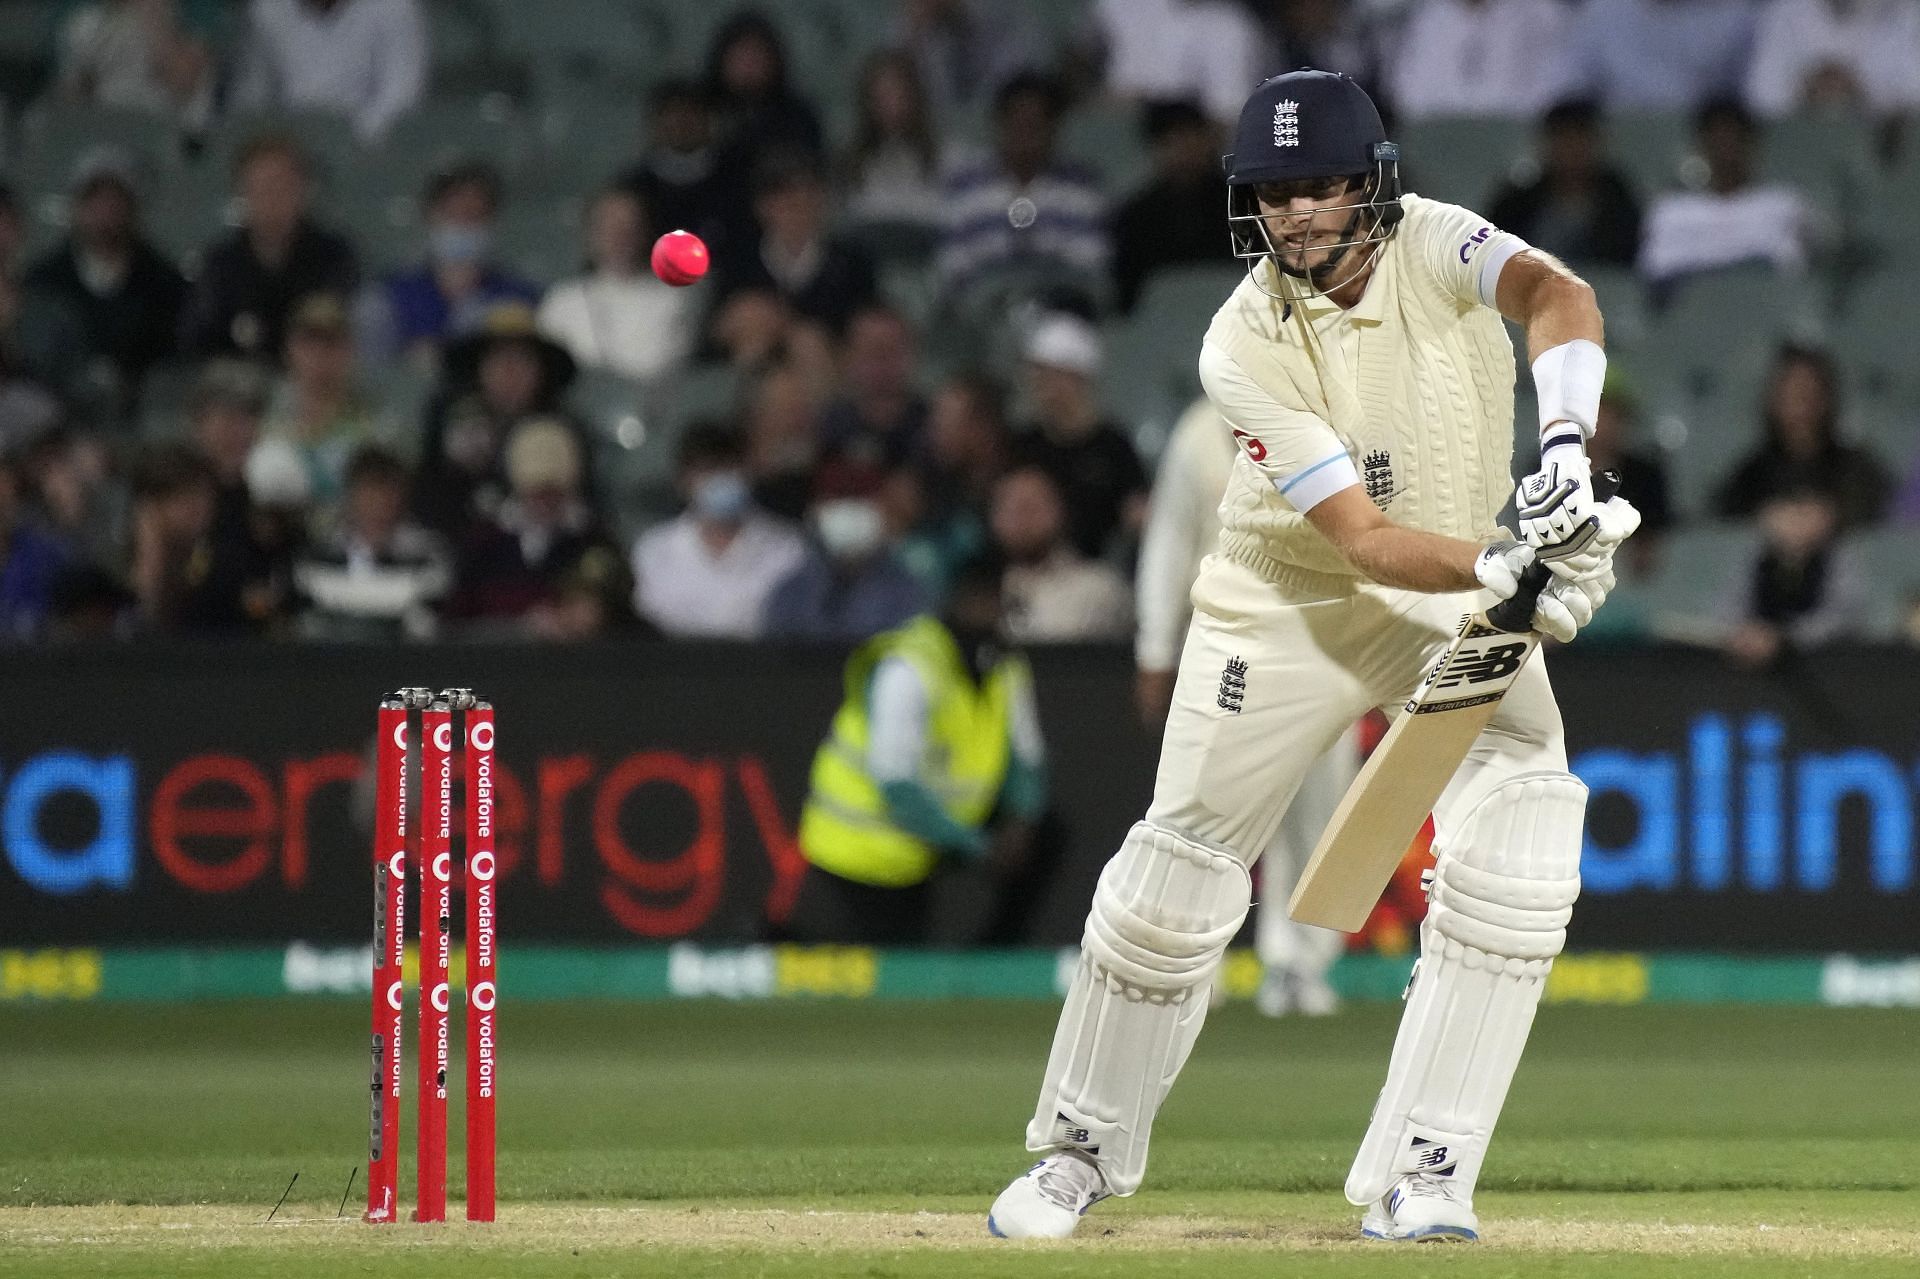 Aakash Chopra highlighted that England are overly dependent on Joe Root